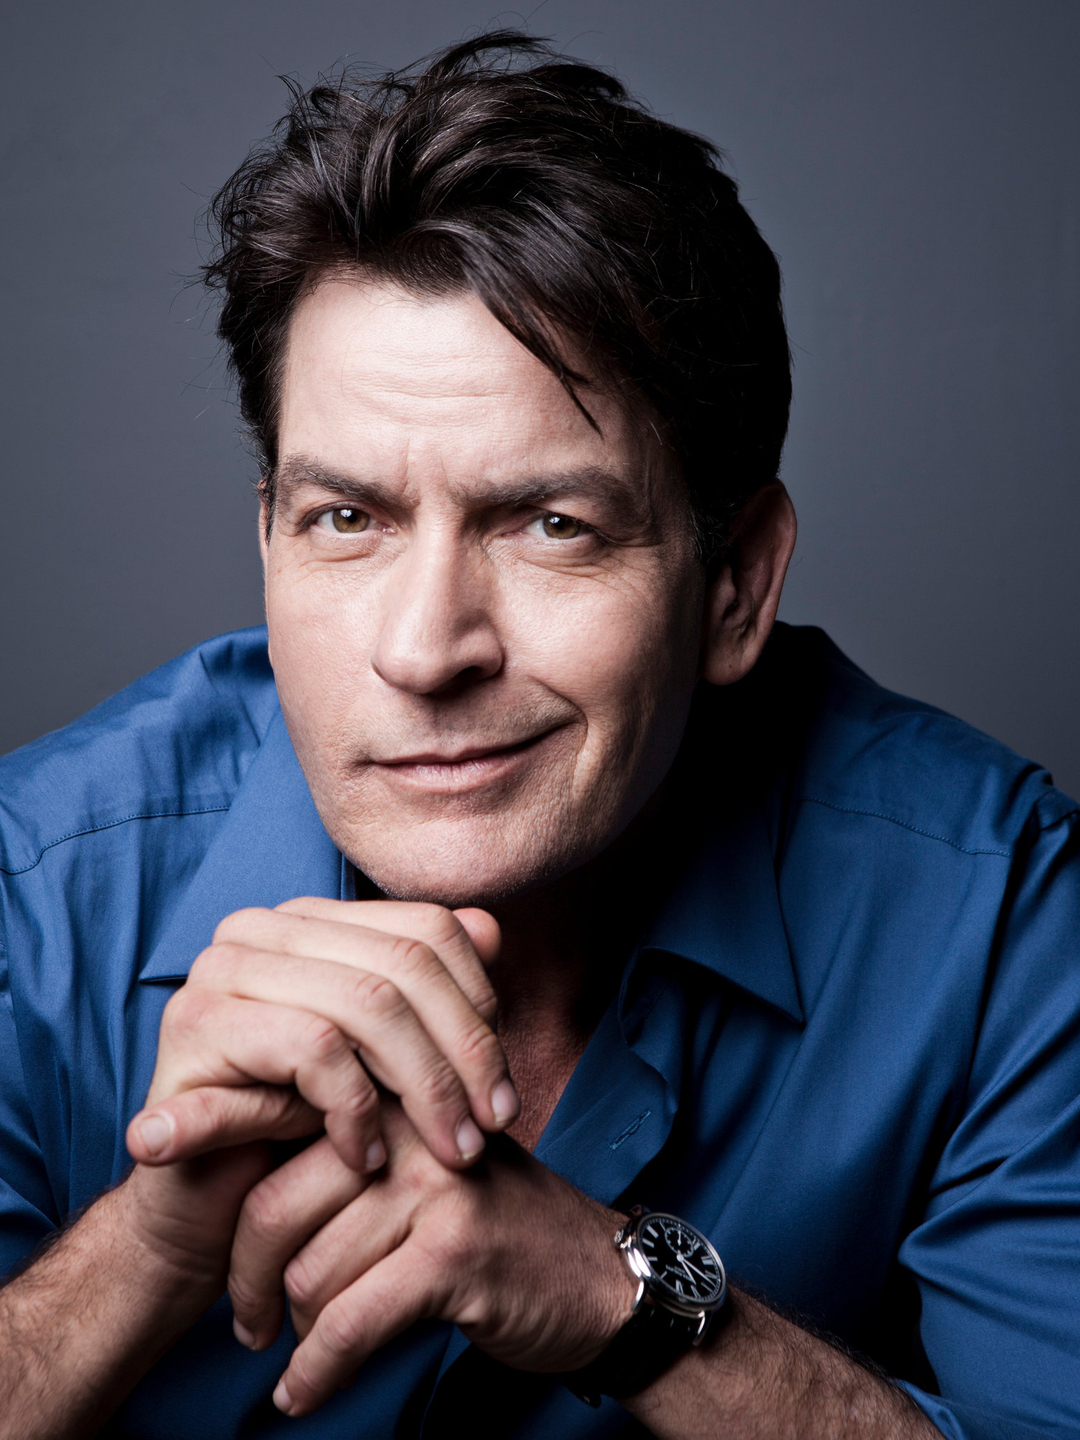 Charlie Sheen story of success